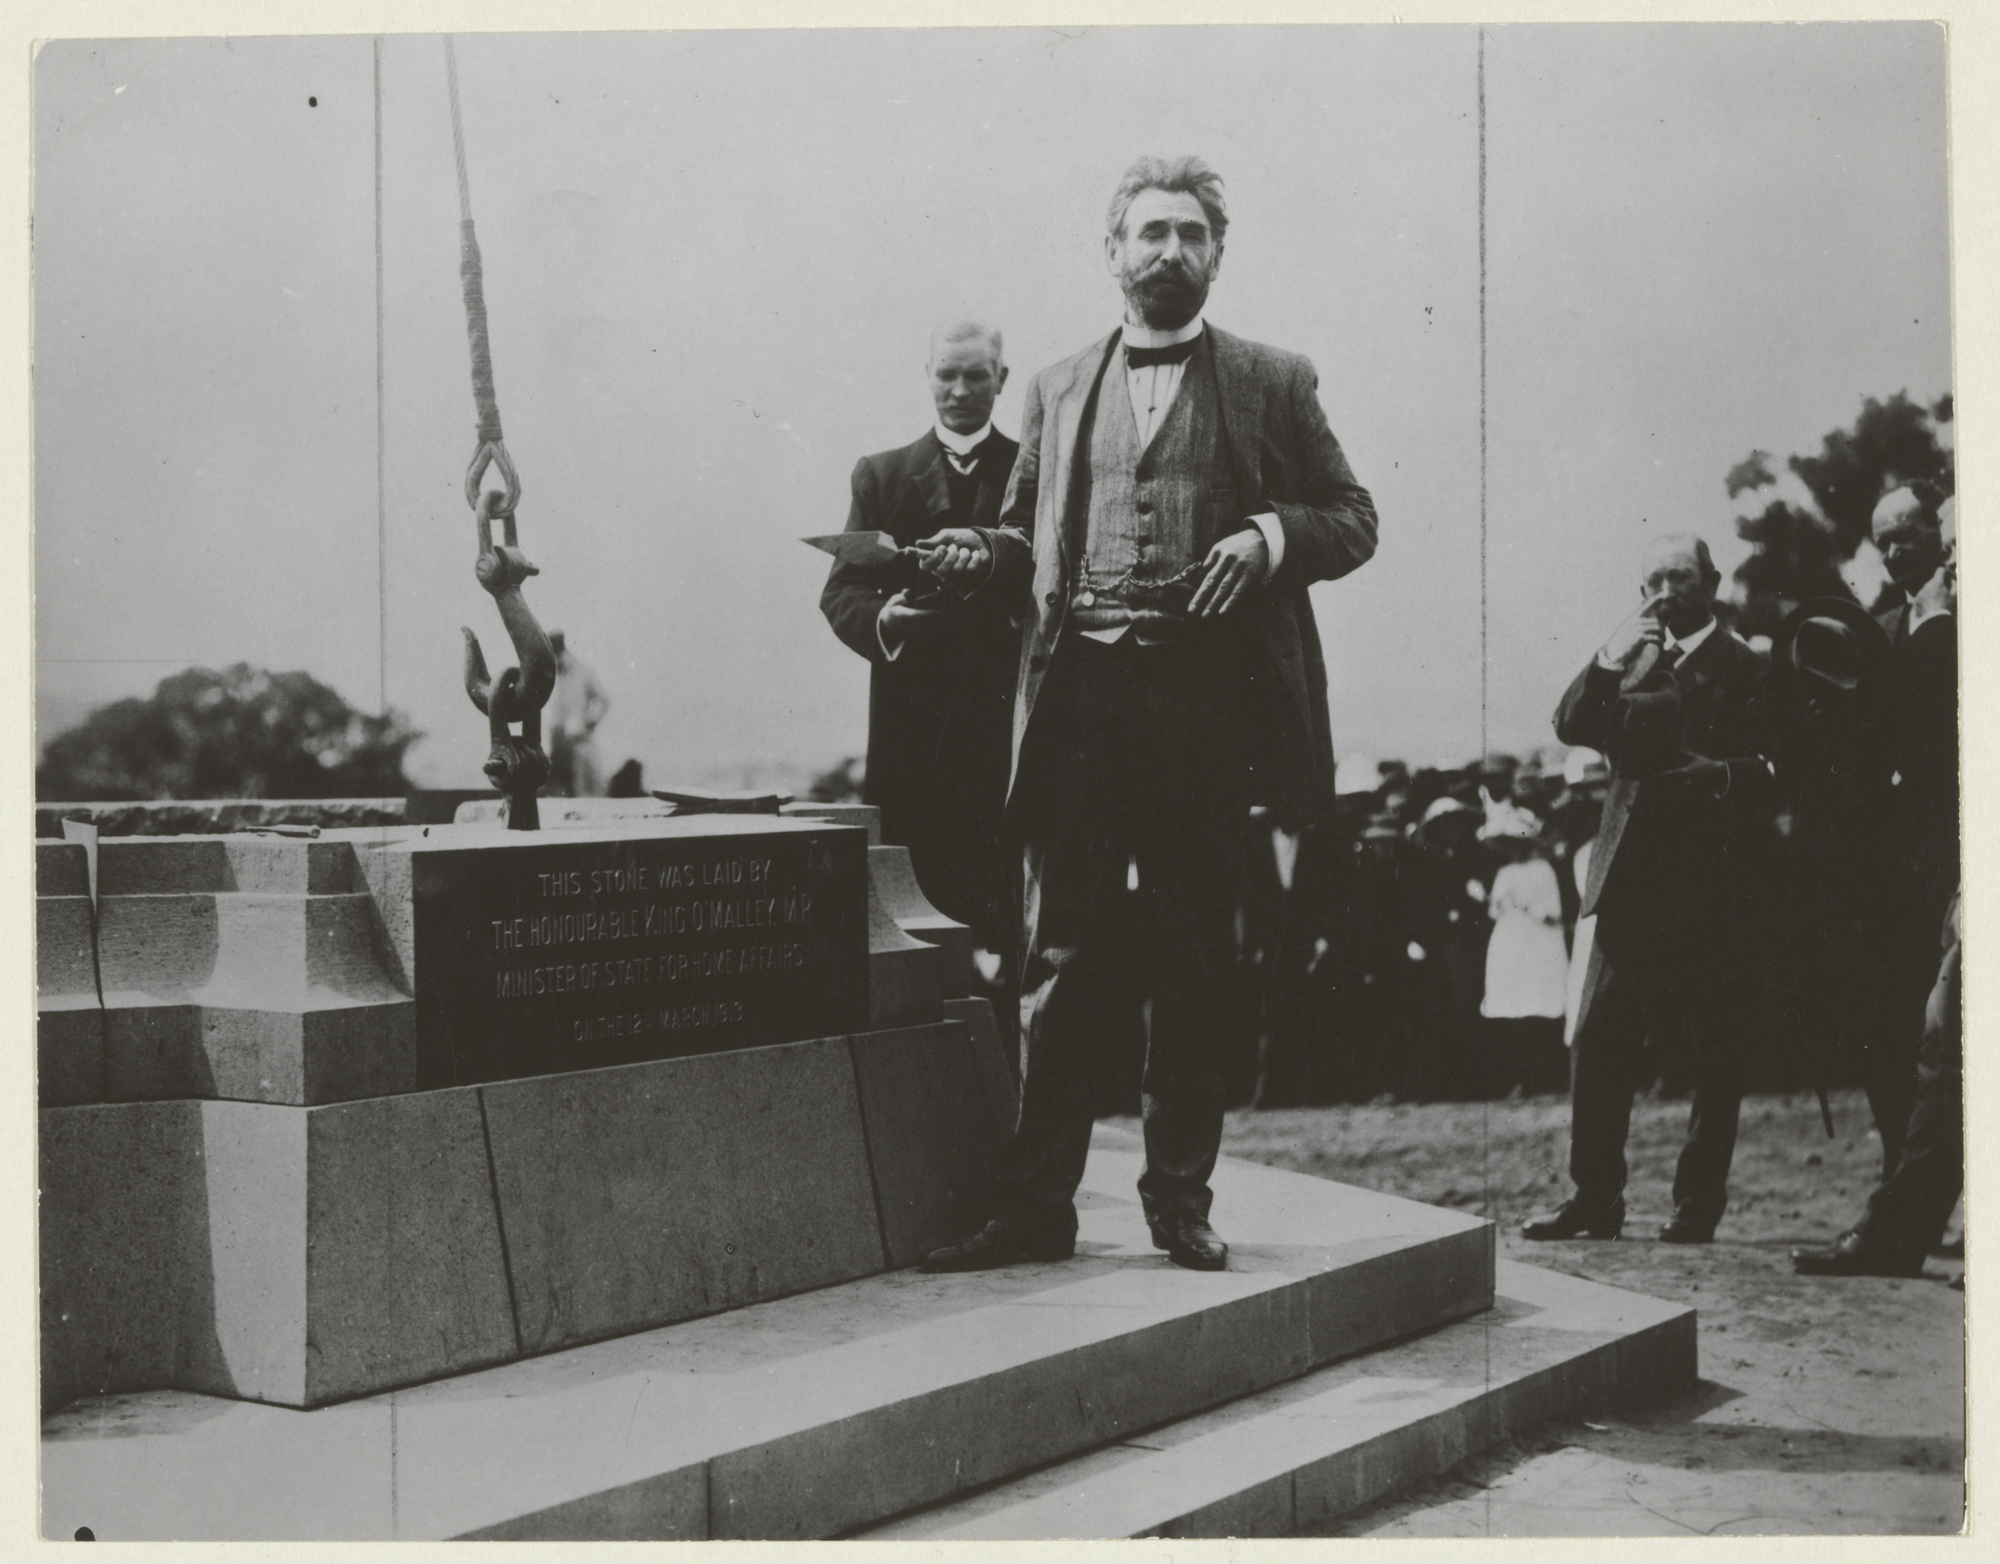 Minister for Home Affairs, King O’Malley, laying the third stone at the ceremony to name Canberra, with Prime Minister Andrew Fisher looking on, 12 March 1913 National Library of Australia VN4699293